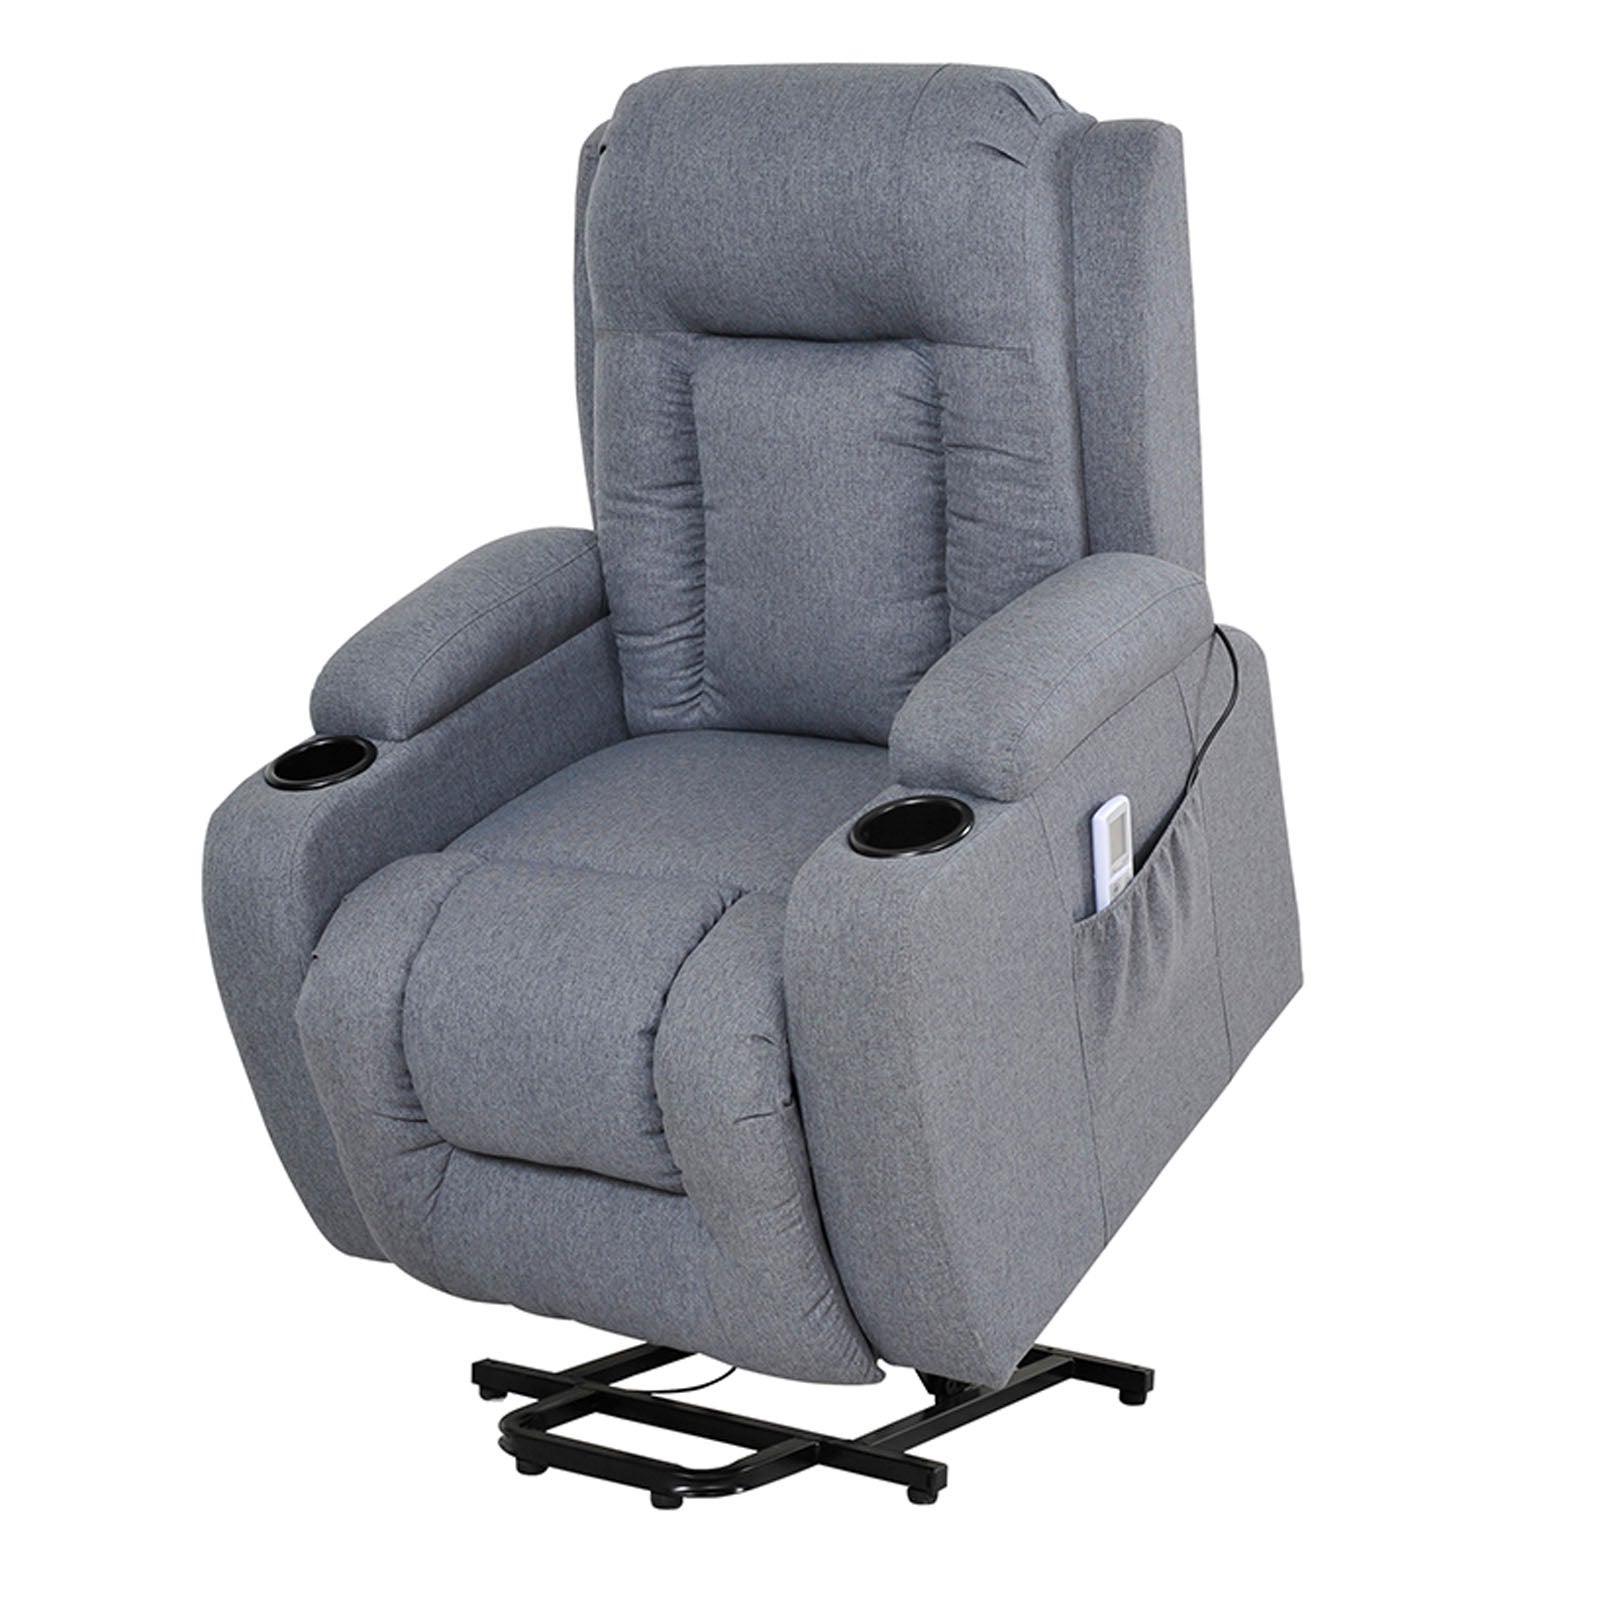 Advwin Electric Lift Massage Chair Recliner Lounge Seat Fabric Grey with Remote Control, Adjustable Heat, and 45-160 Degrees, with Two Cup Holders and Side Pockets